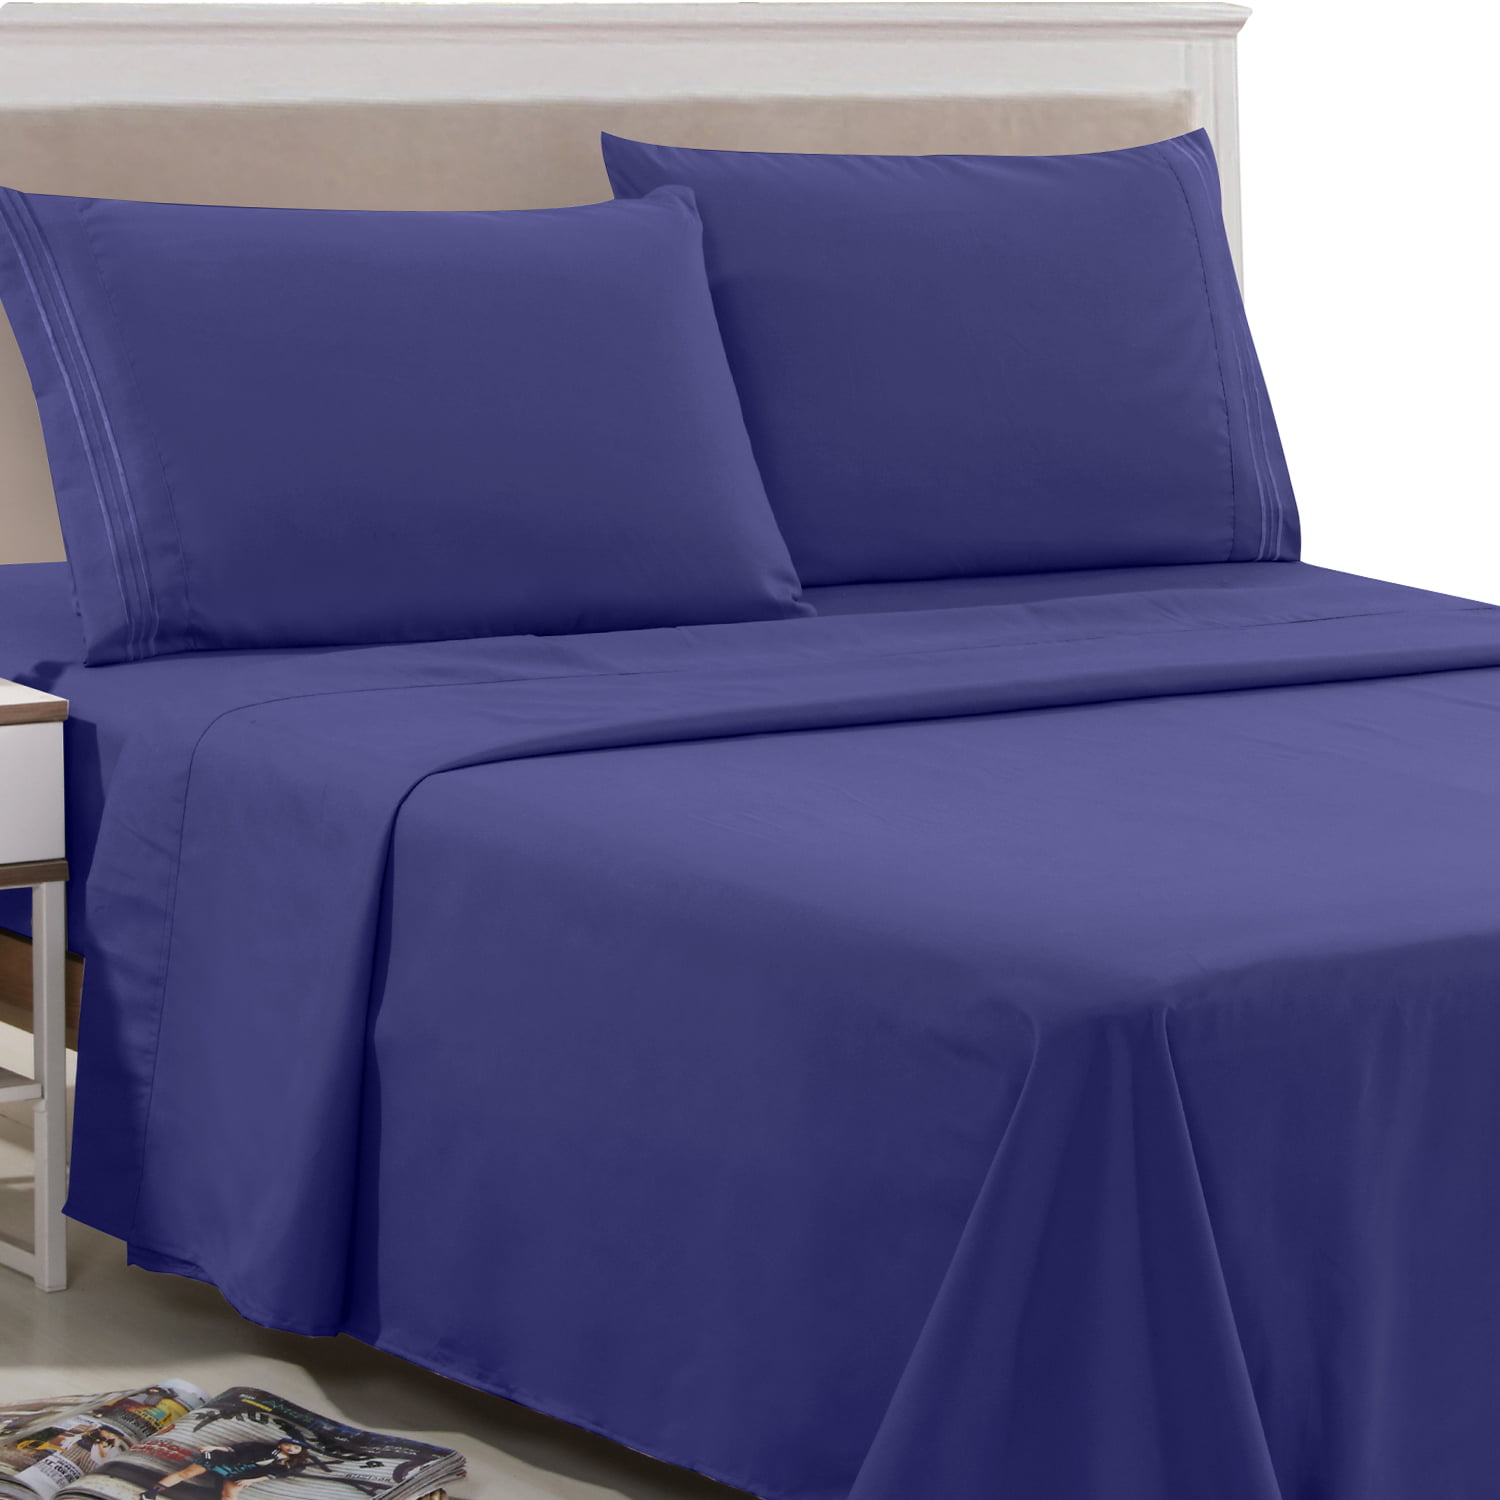 Details about   LUXURY FLAT BED SHEETS 100% POLYCOTTON SINGLE DOUBLE KING SIZE 